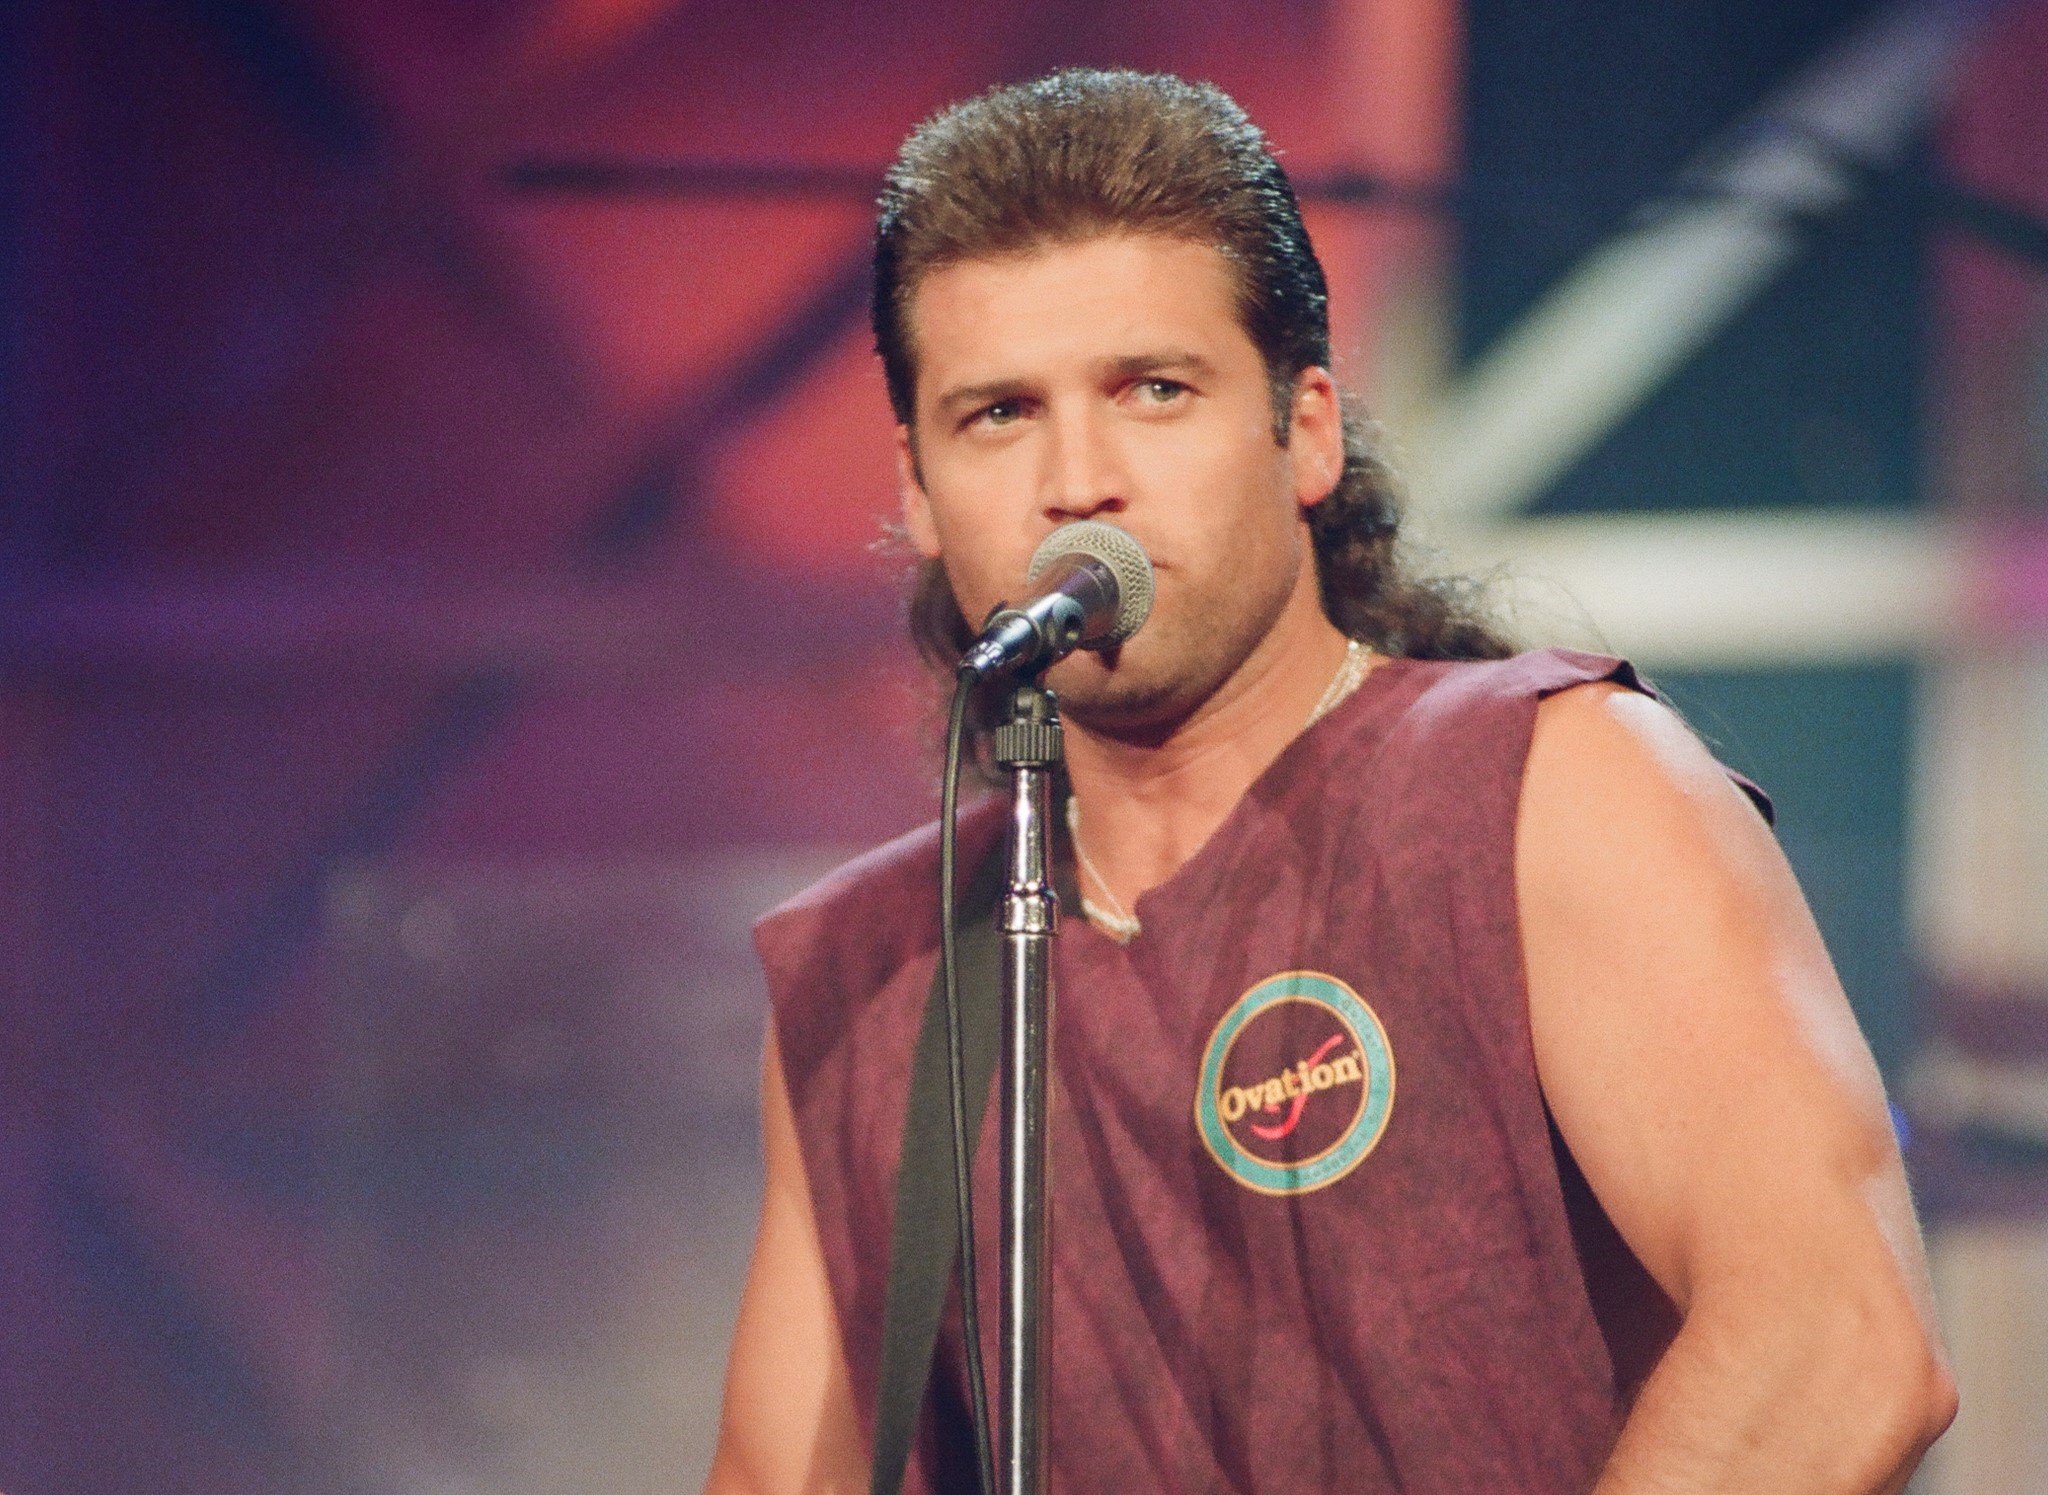 Billy Ray Cyrus performing on 'The Tonight Show'